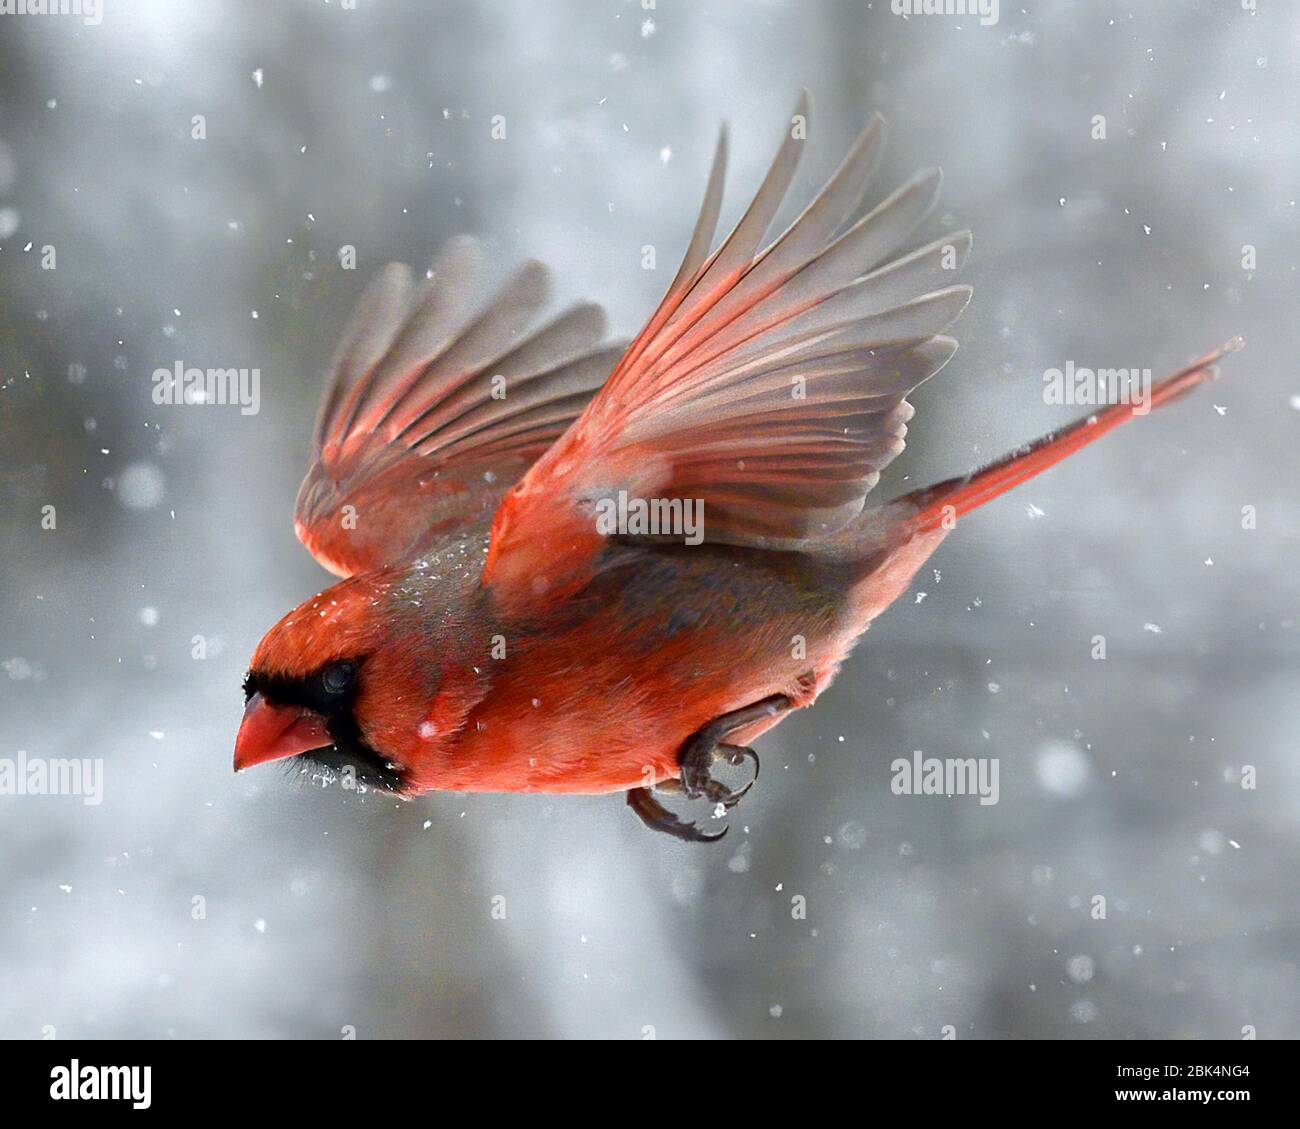 Cardinal in flight with a gray snowy background with snowflakes showing and full view of bird with wings in upward position. Stock Photo